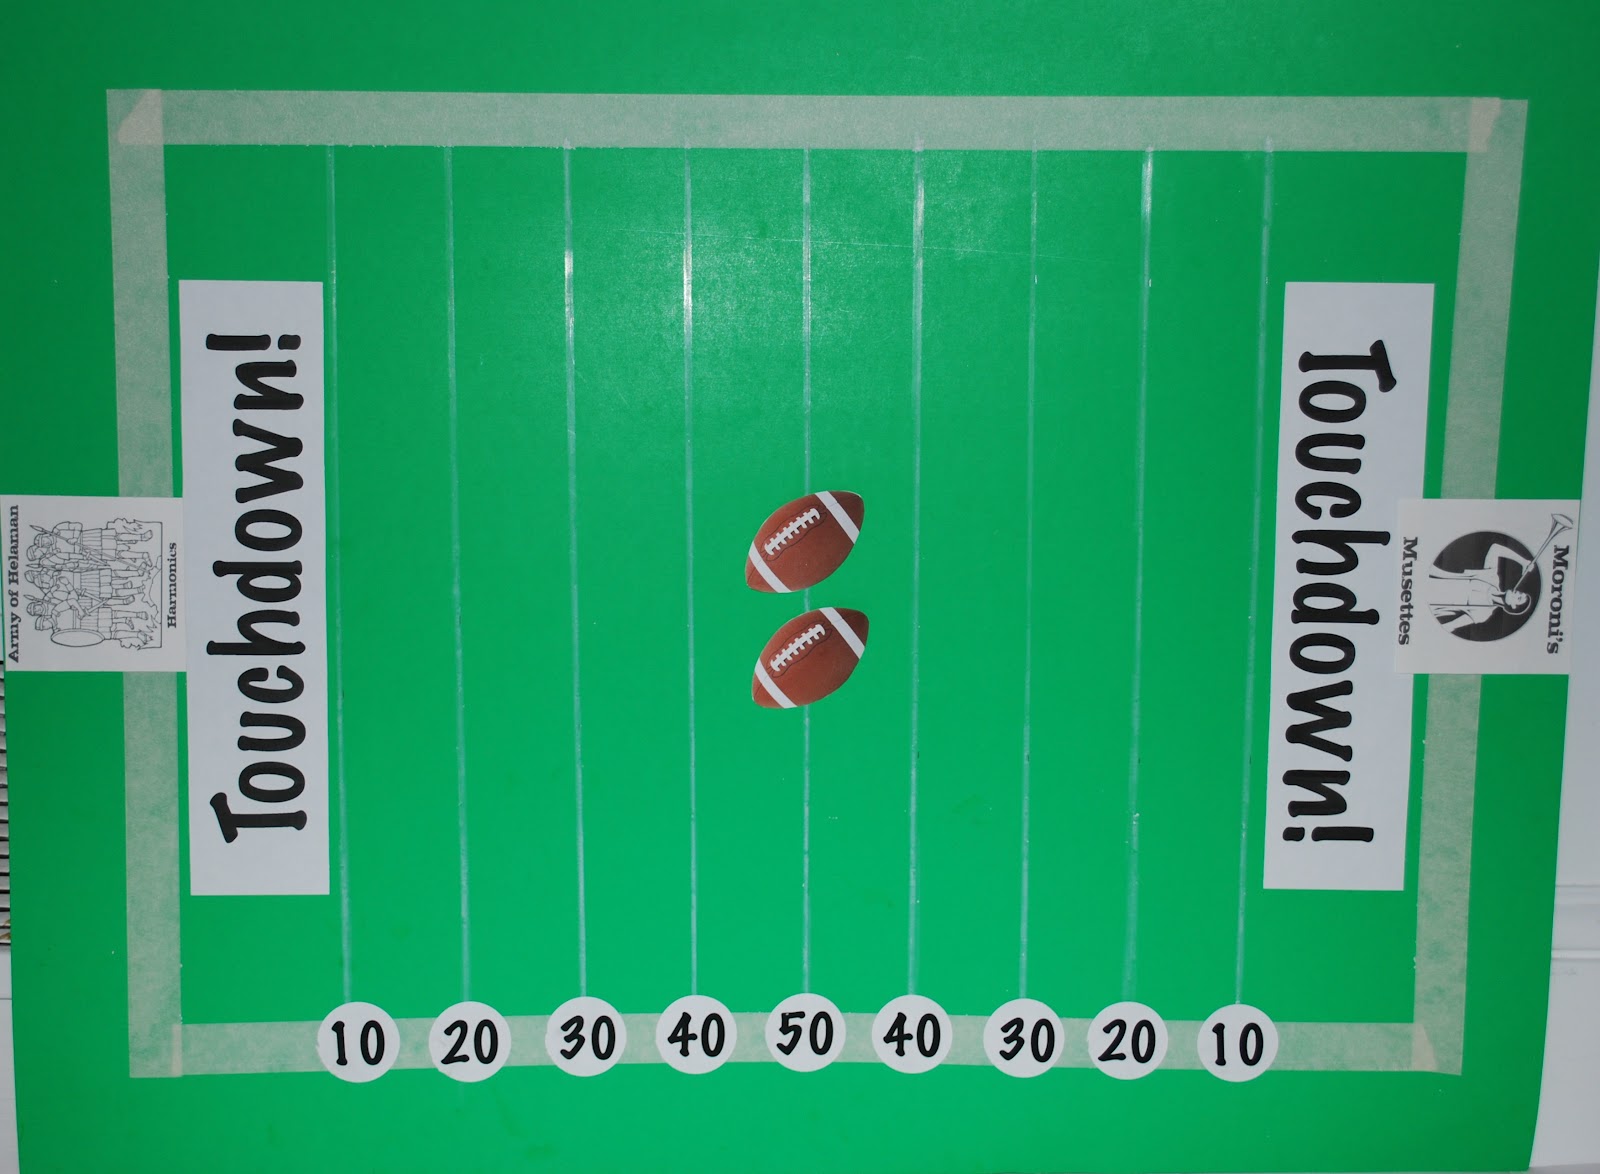 clipart of football field - photo #37